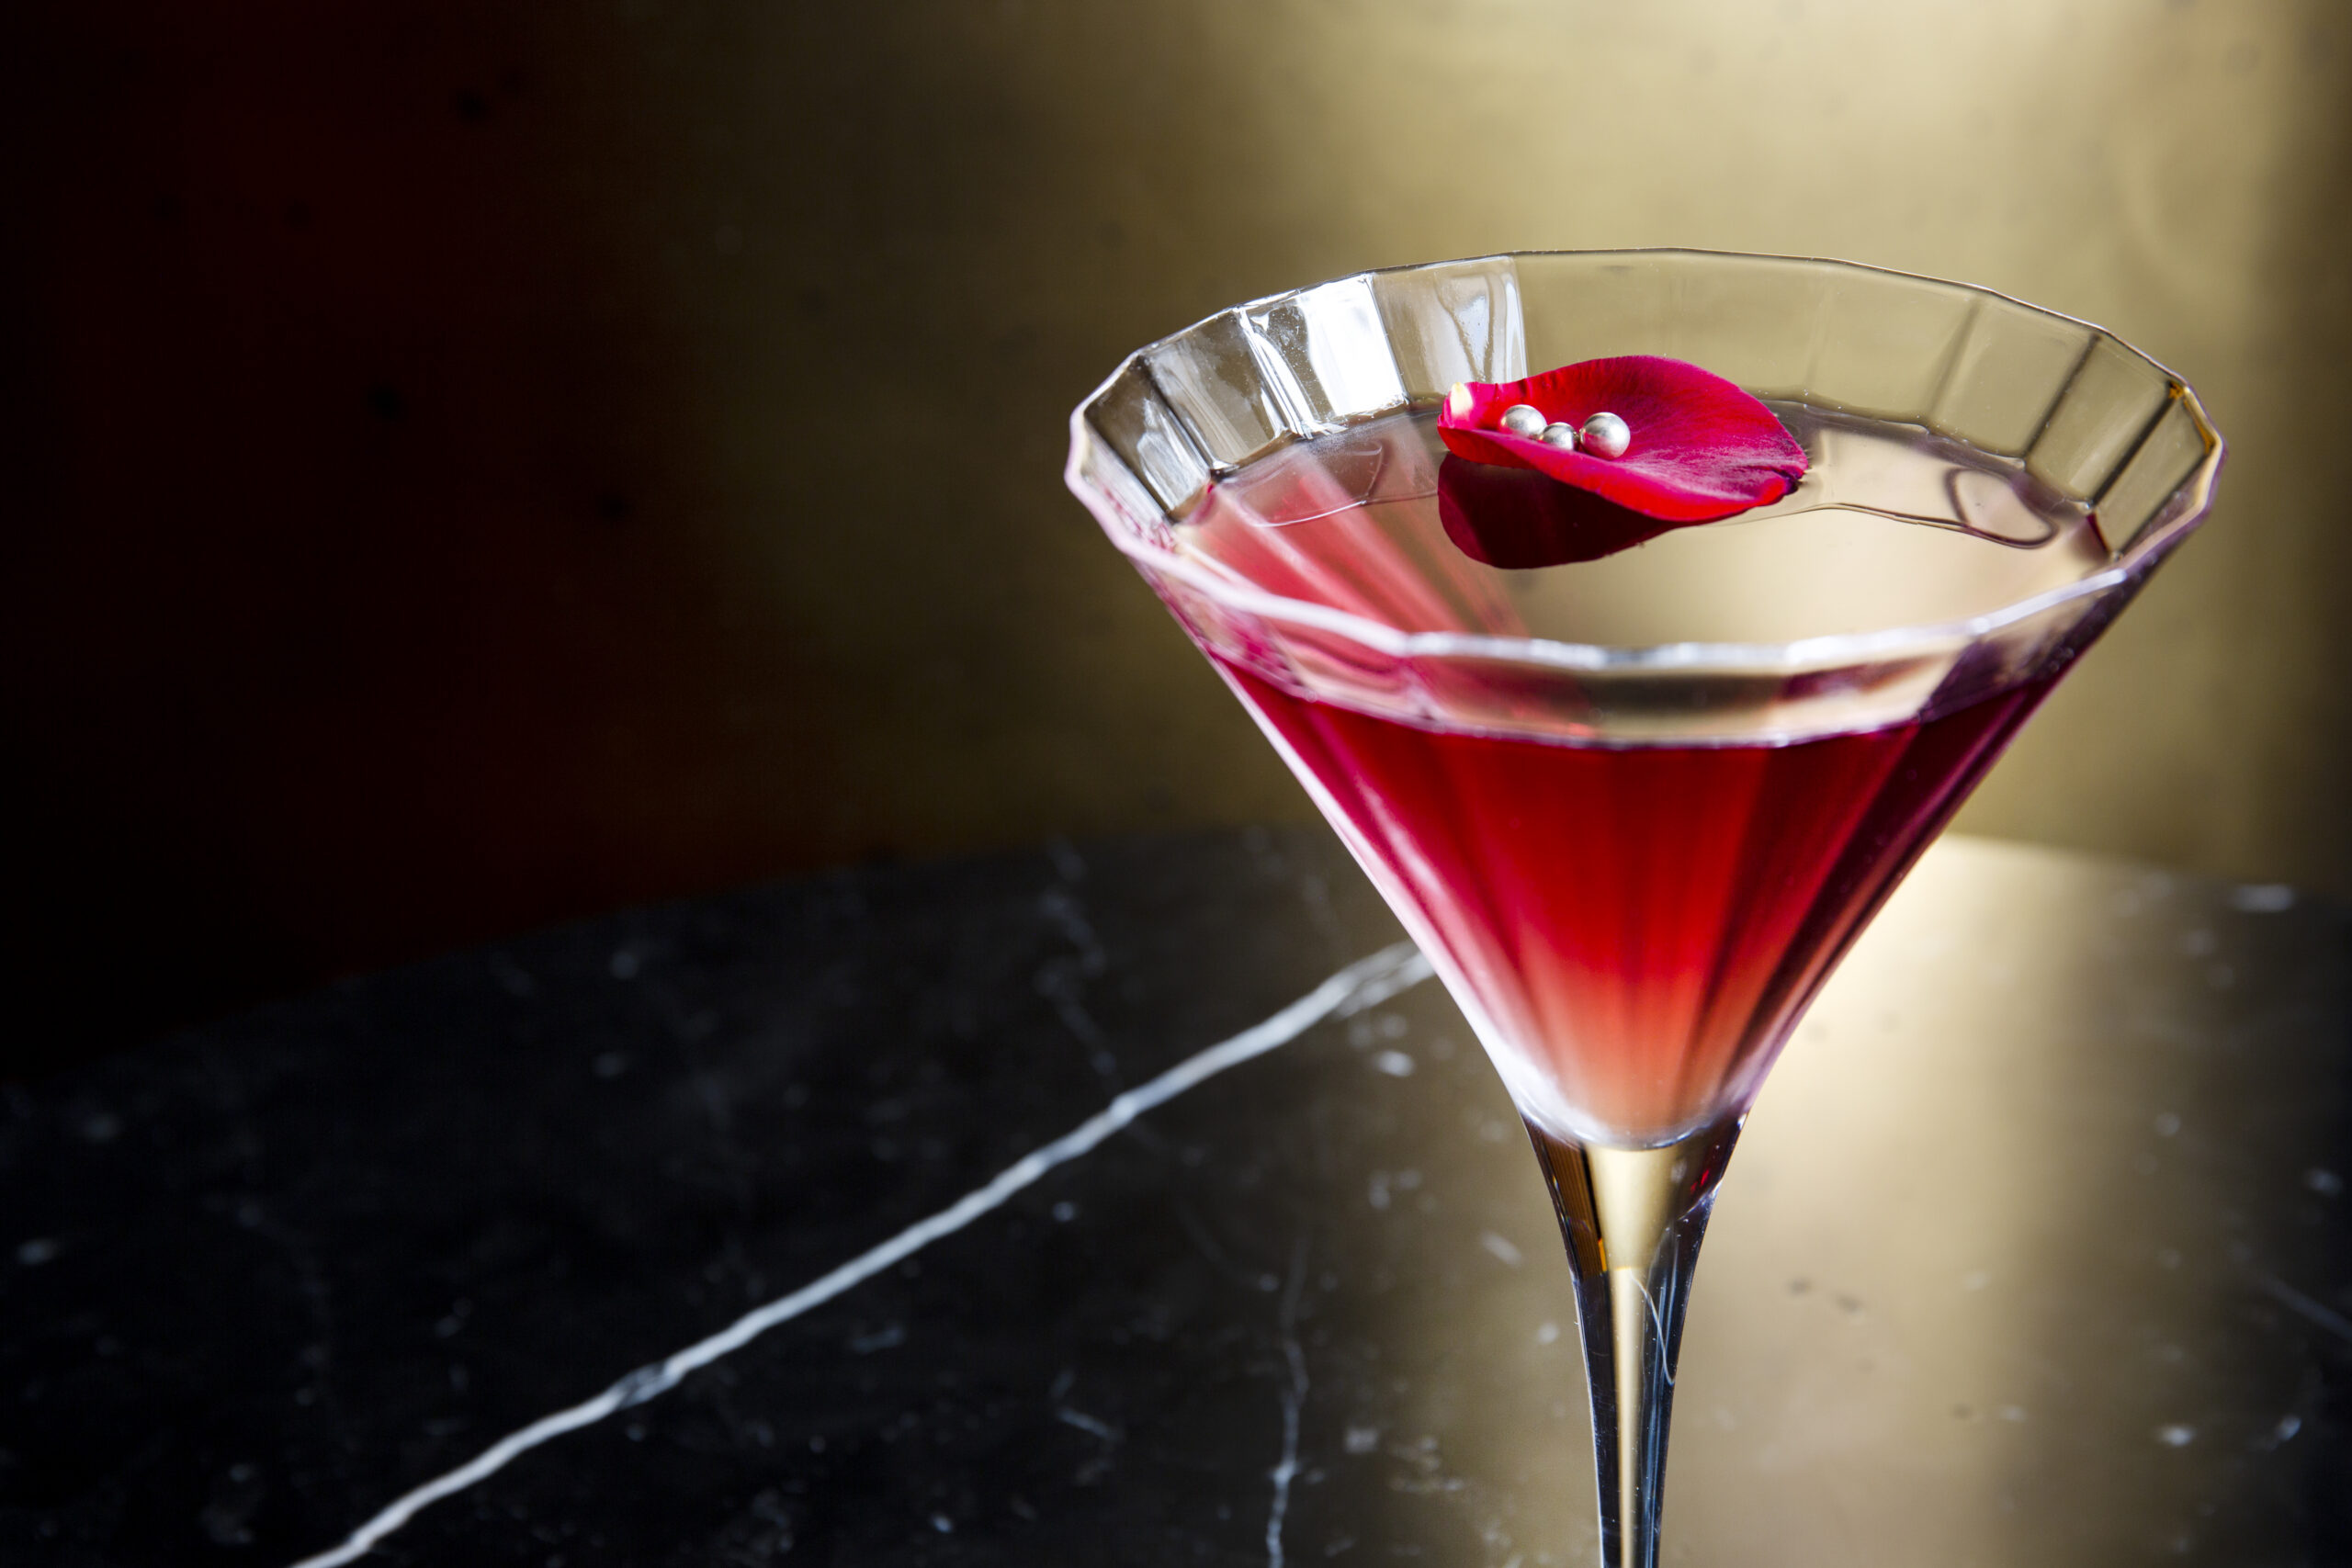 The Femme Fatal cocktail has been created with David Bowie’s love of martinis in mind.